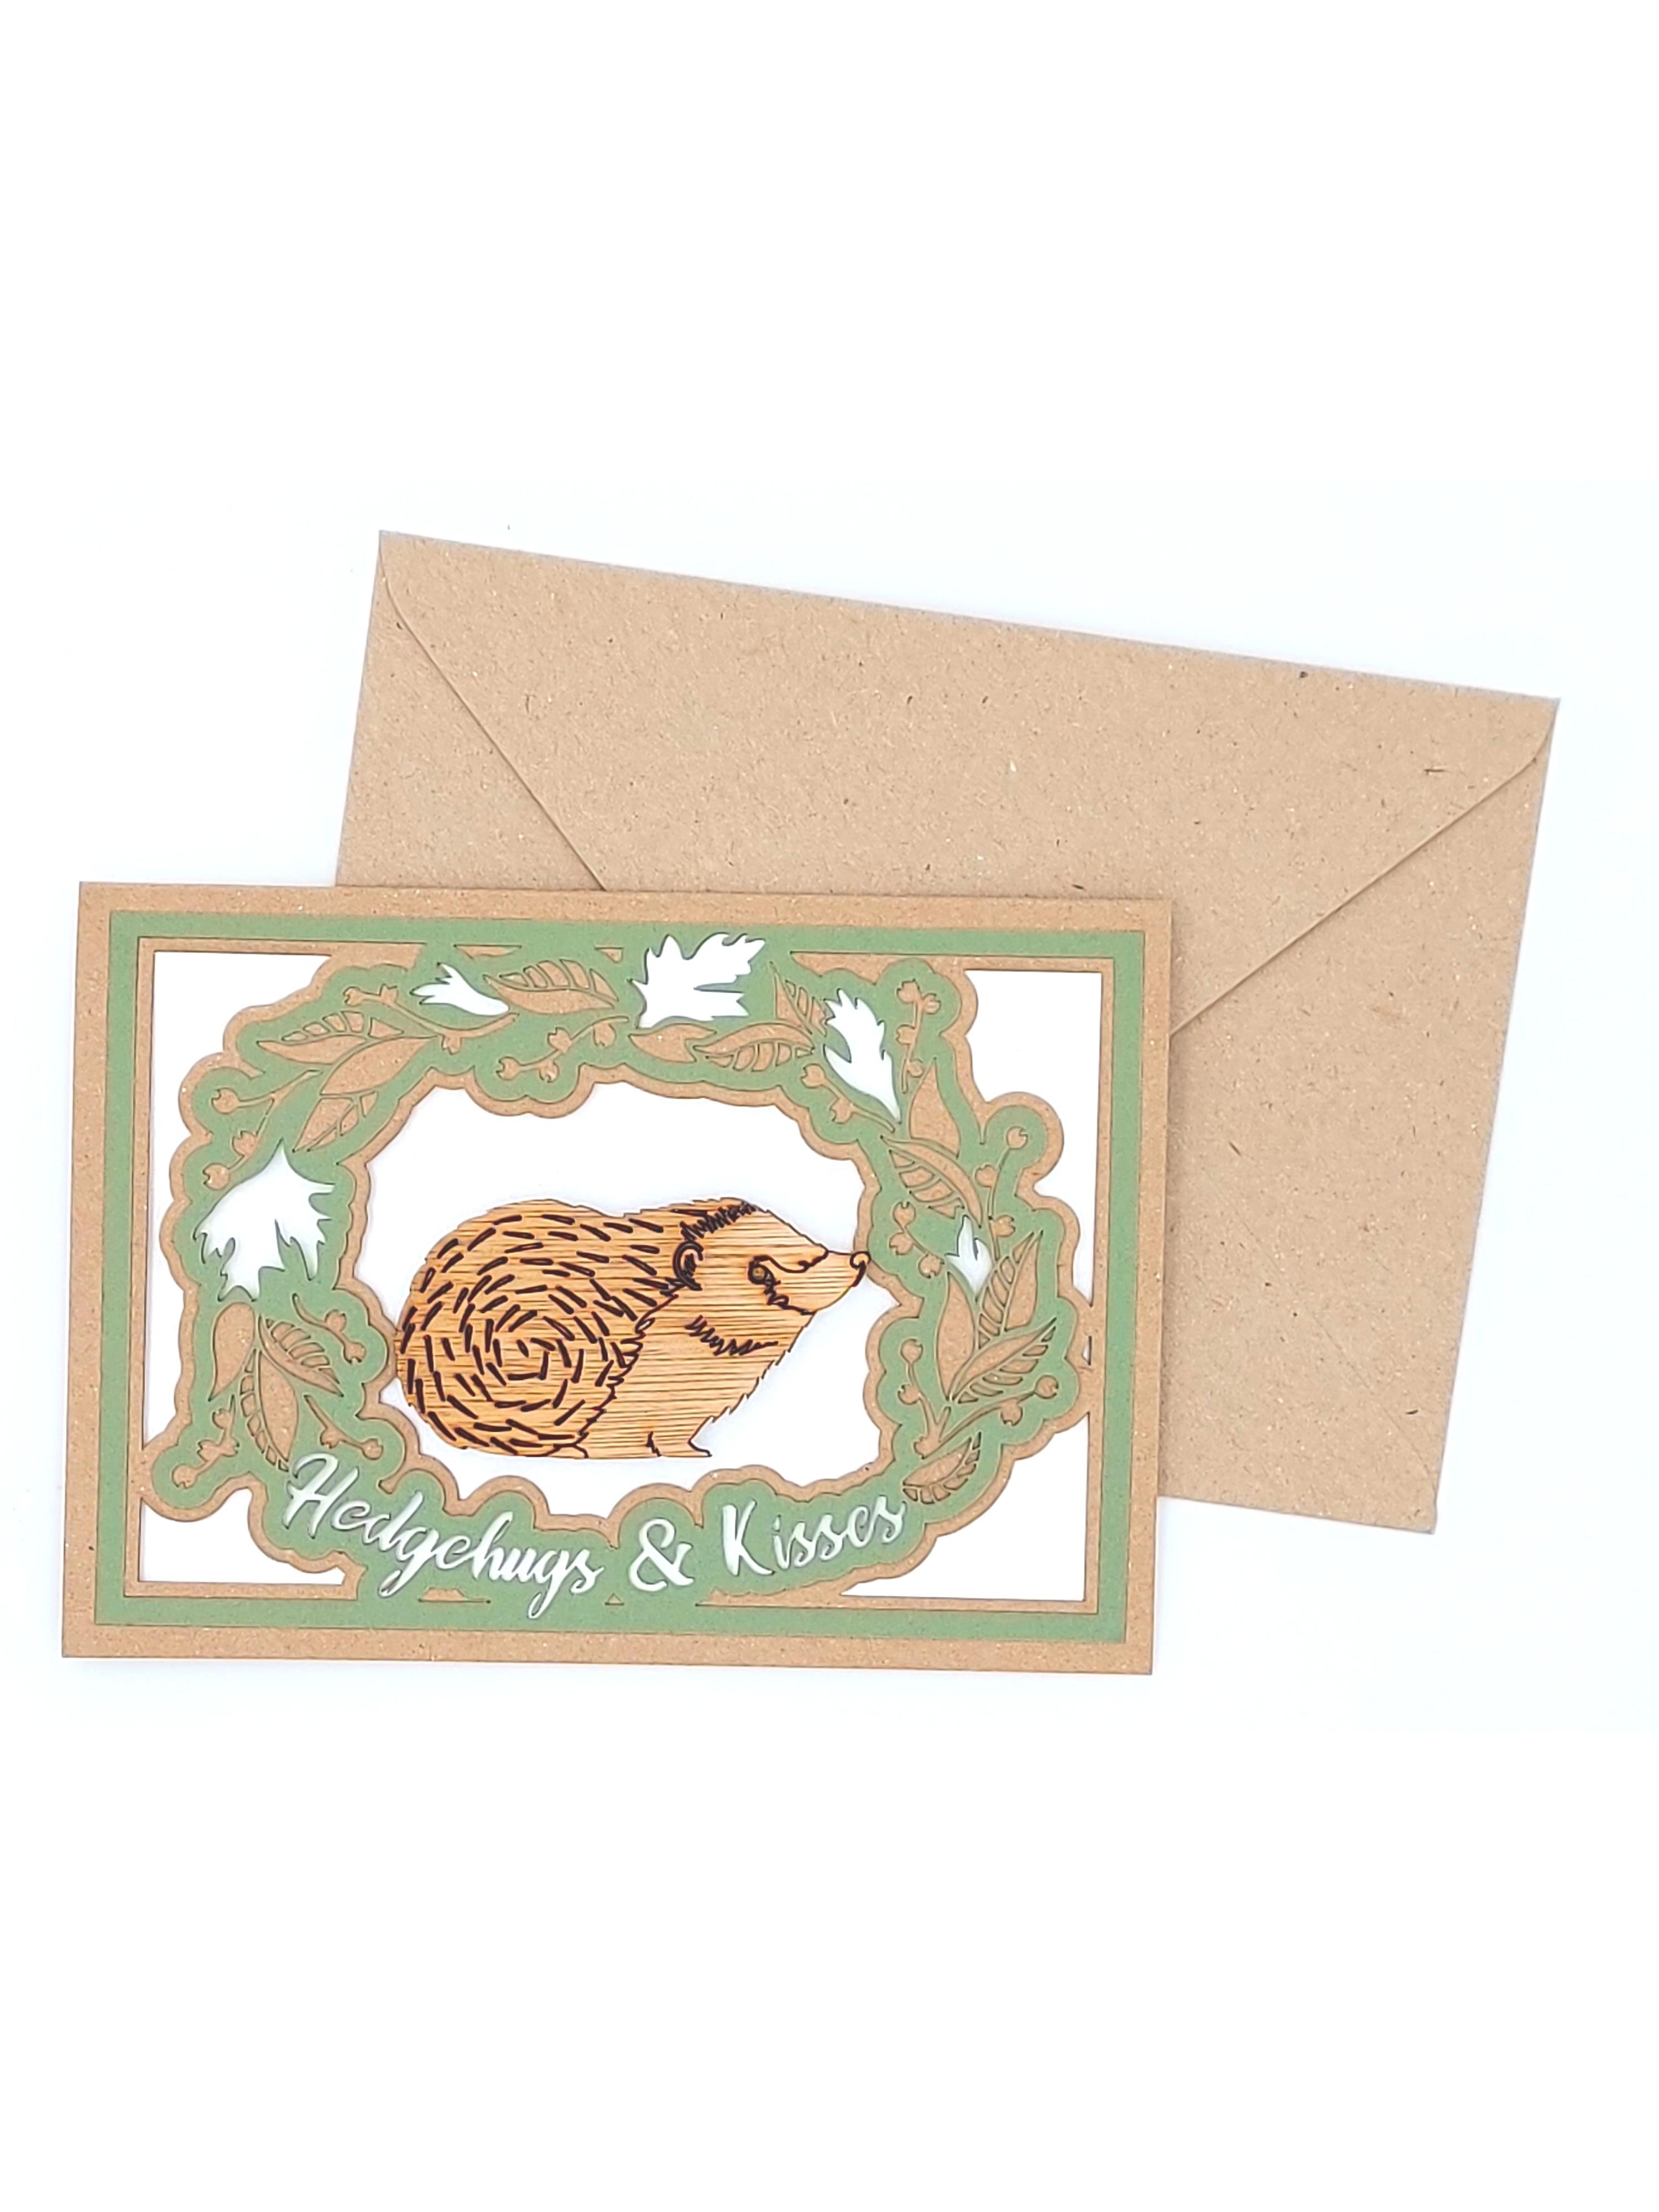 Hedgehugs and Kisses Card